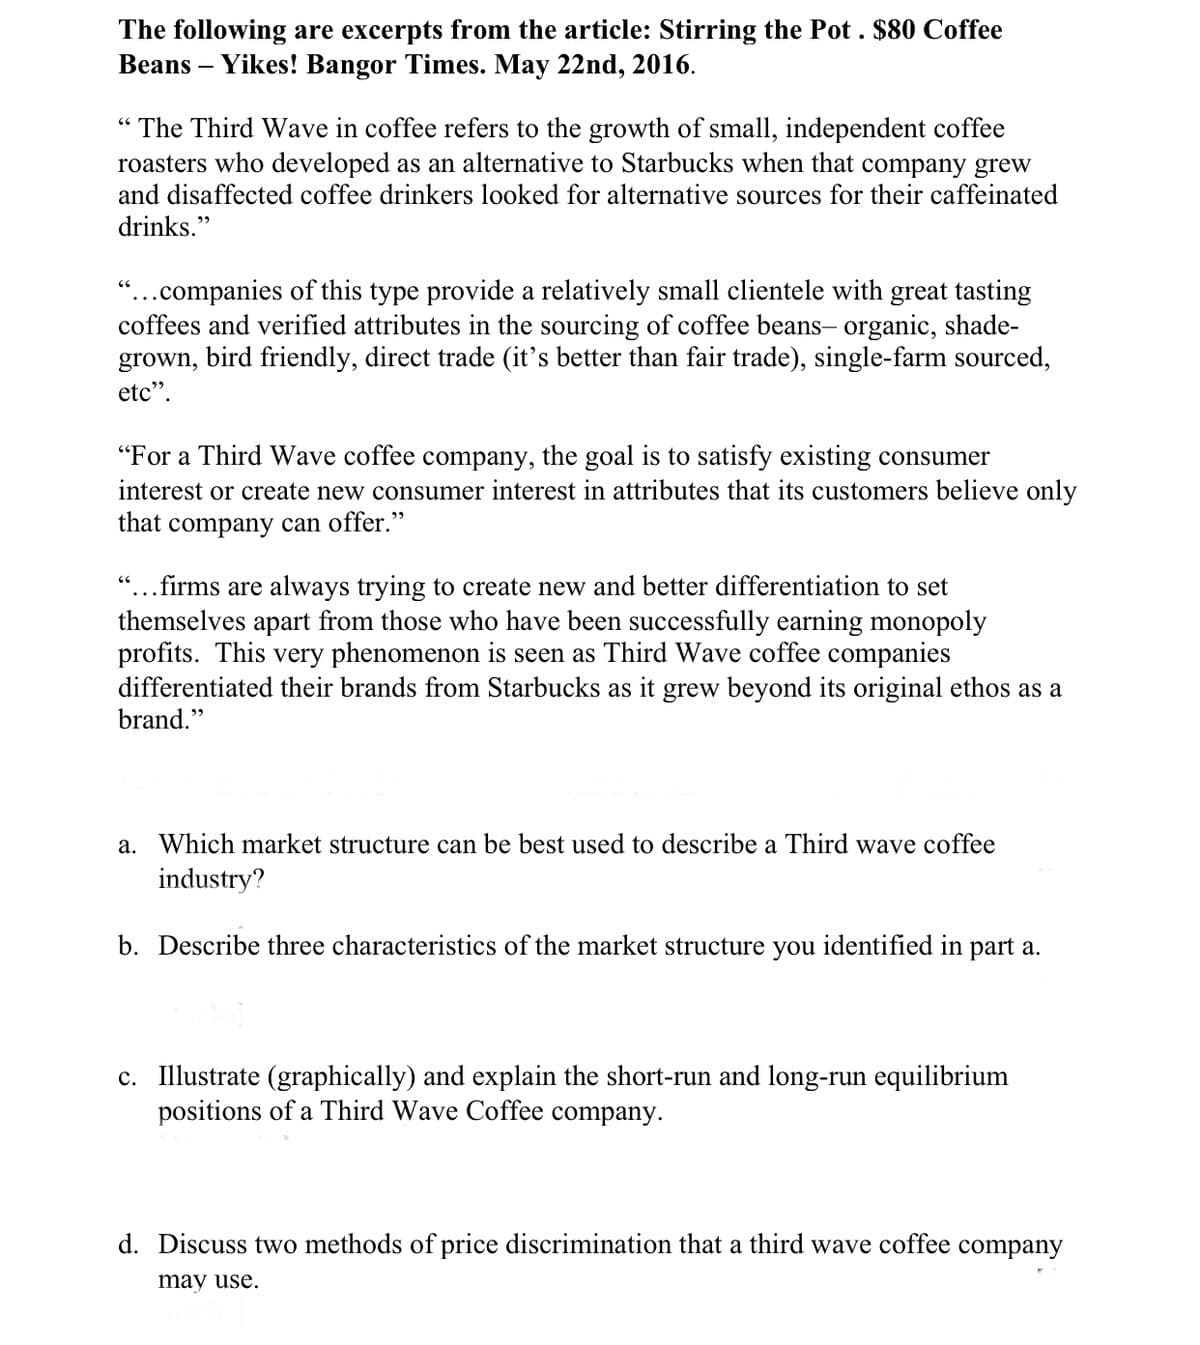 The following are excerpts from the article: Stirring the Pot . $80 Coffee
Beans – Yikes! Bangor Times. May 22nd, 2016.
“ The Third Wave in coffee refers to the growth of small, independent coffee
roasters who developed as an alternative to Starbucks when that company grew
and disaffected coffee drinkers looked for alternative sources for their caffeinated
drinks."
"...companies of this type provide a relatively small clientele with great tasting
coffees and verified attributes in the sourcing of coffee beans- organic, shade-
grown, bird friendly, direct trade (it's better than fair trade), single-farm sourced,
etc".
"For a Third Wave coffee company,
the goal is to satisfy existing consumer
interest or create new consumer interest in attributes that its customers believe only
that company can offer."
"...firms are always trying to create new and better differentiation to set
themselves apart from those who have been successfully earning monopoly
profits. This very phenomenon is seen as Third Wave coffee companies
differentiated their brands from Starbucks as it grew beyond its original ethos as a
brand."
a. Which market structure can be best used to describe a Third wave coffee
industry?
b. Describe three characteristics of the market structure you identified in part a.
c. Illustrate (graphically) and explain the short-run and long-run equilibrium
positions of a Third Wave Coffee company.
d.
cuss two methods of price discrimination that a thi
wave coffee company
may use.
